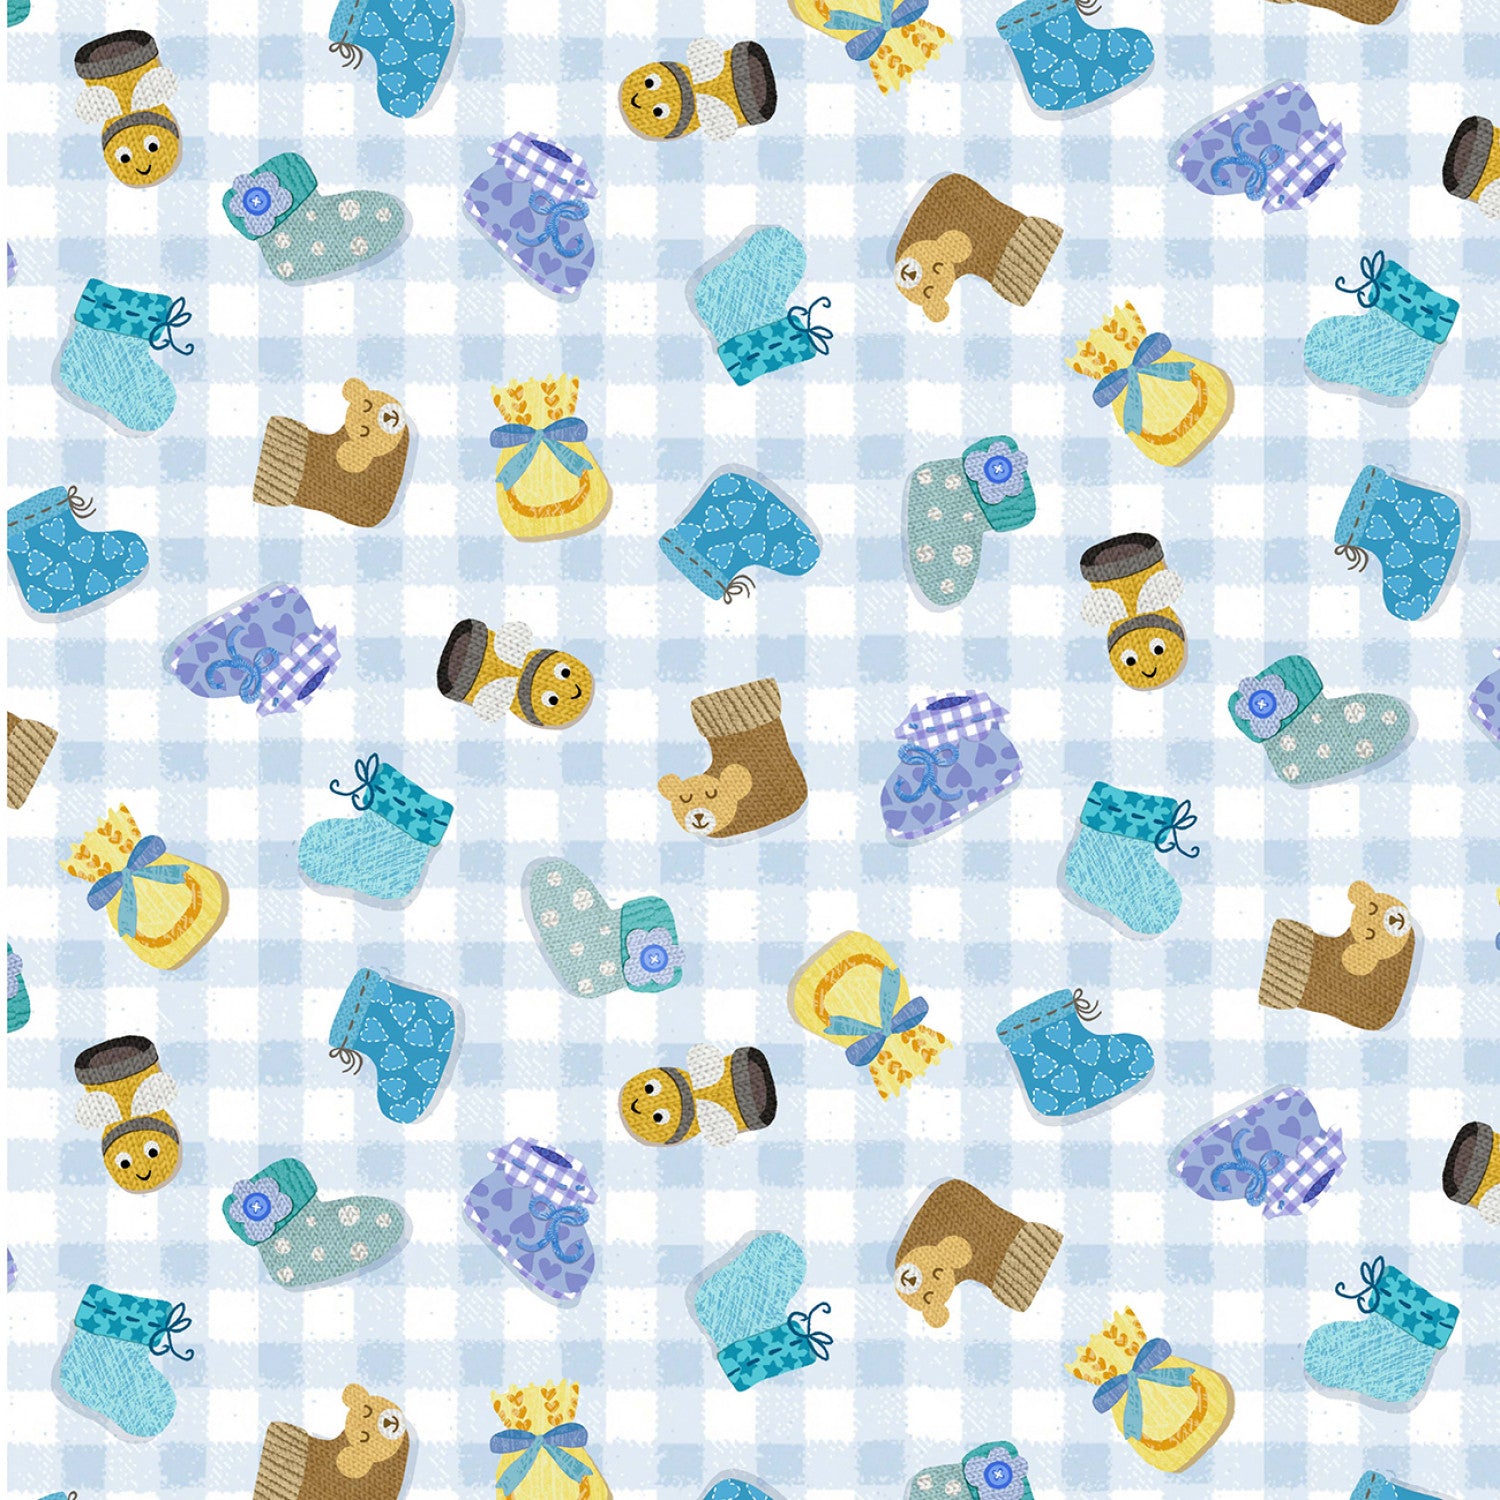 Baby Love - Blue Pitter Patter by Tracy Cottingham for Michael Miller Fabrics